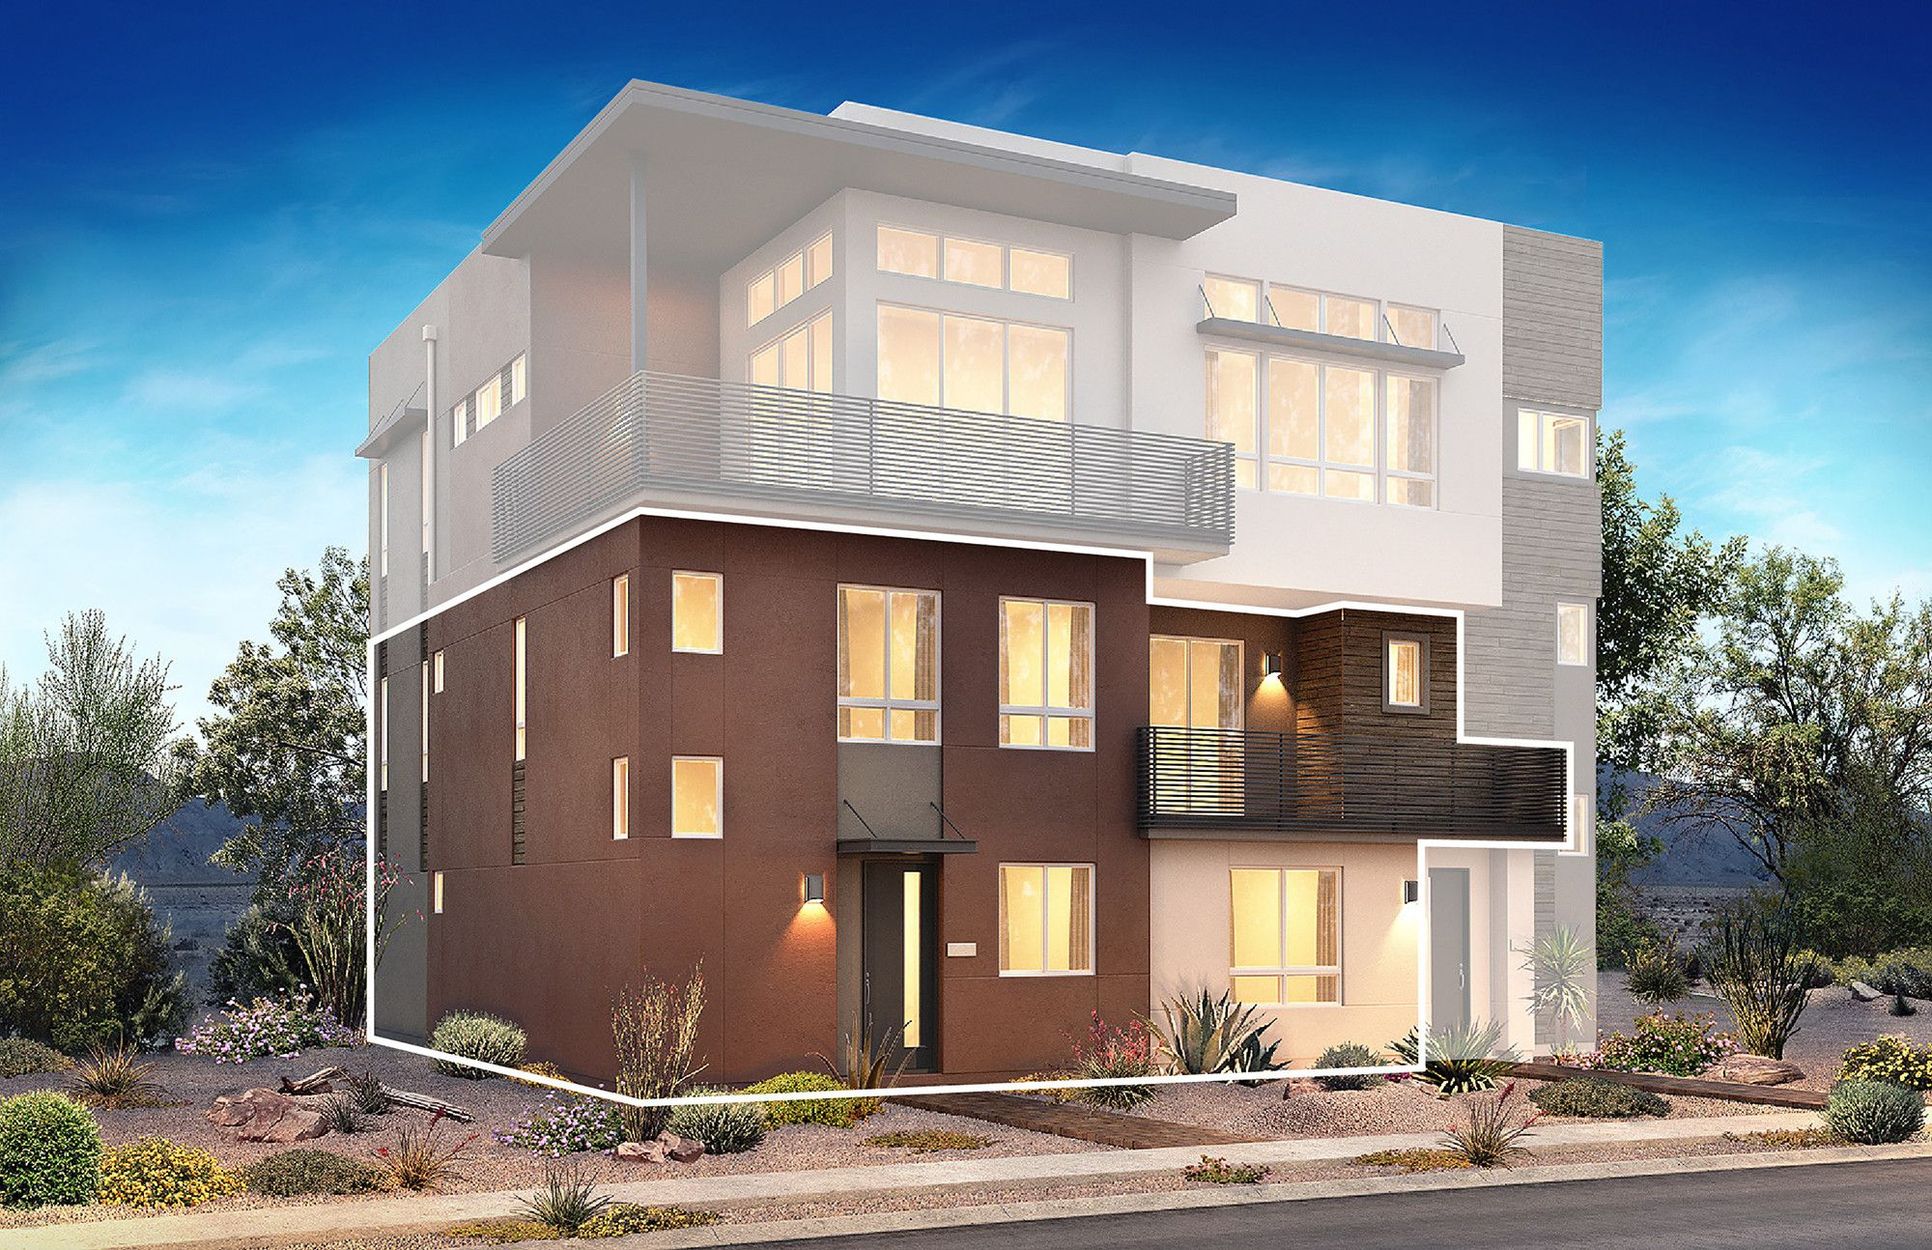 Trilogy in Summerlin Viewpoint Exterior Rendering:Viewpoint Exterior Rendering A